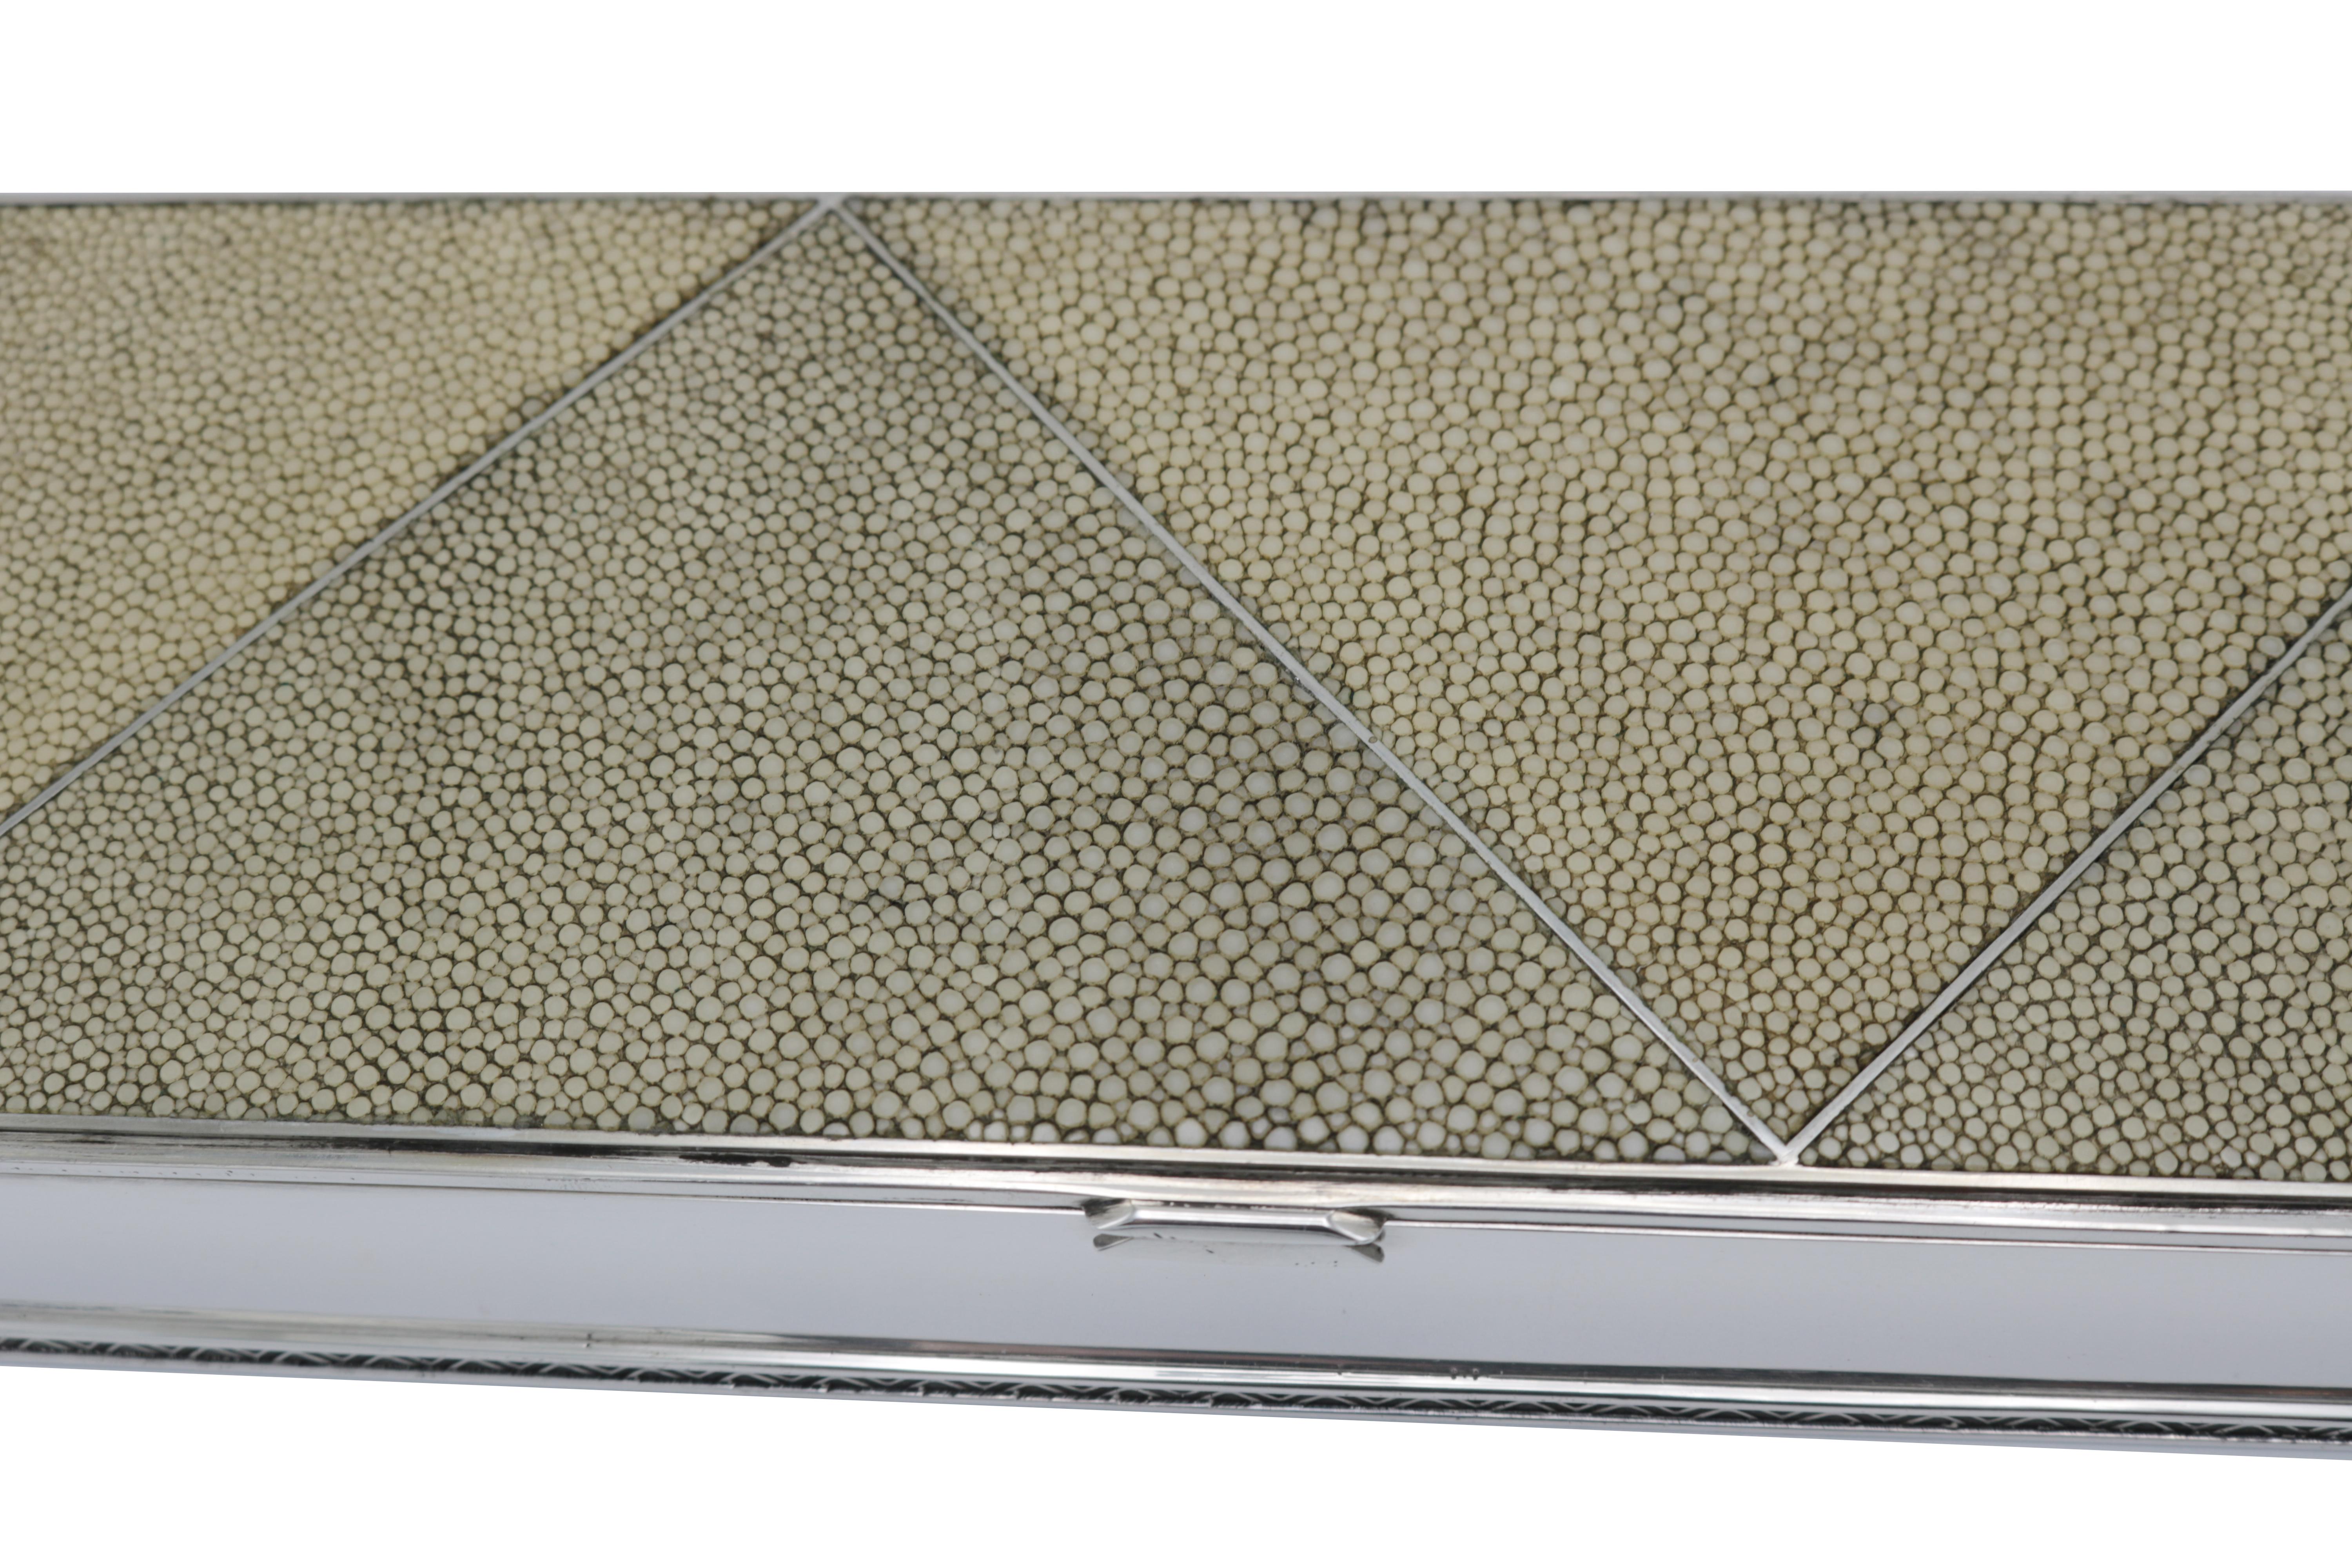 An Art Deco decorative silver box. 
Sterling silver and shagreen.
Marked Sterling on bottom.